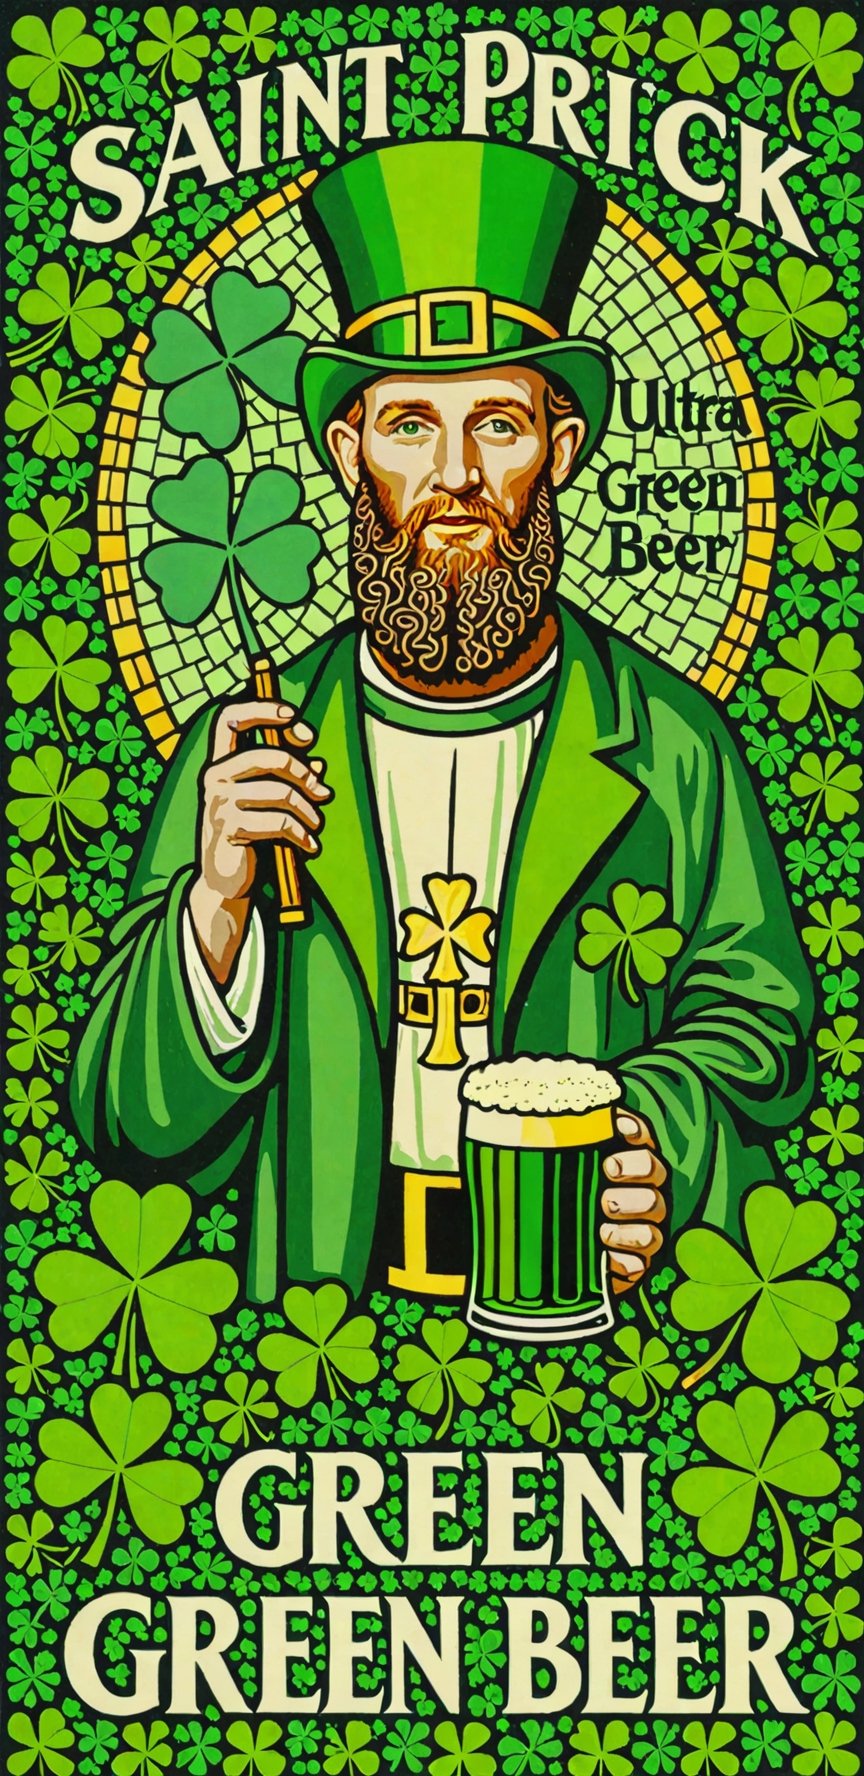 (masterpiece, best quality, ultra-detailed), Image of Saint Patrick, four leaf clover mosaic, with text that says "Green Beer"